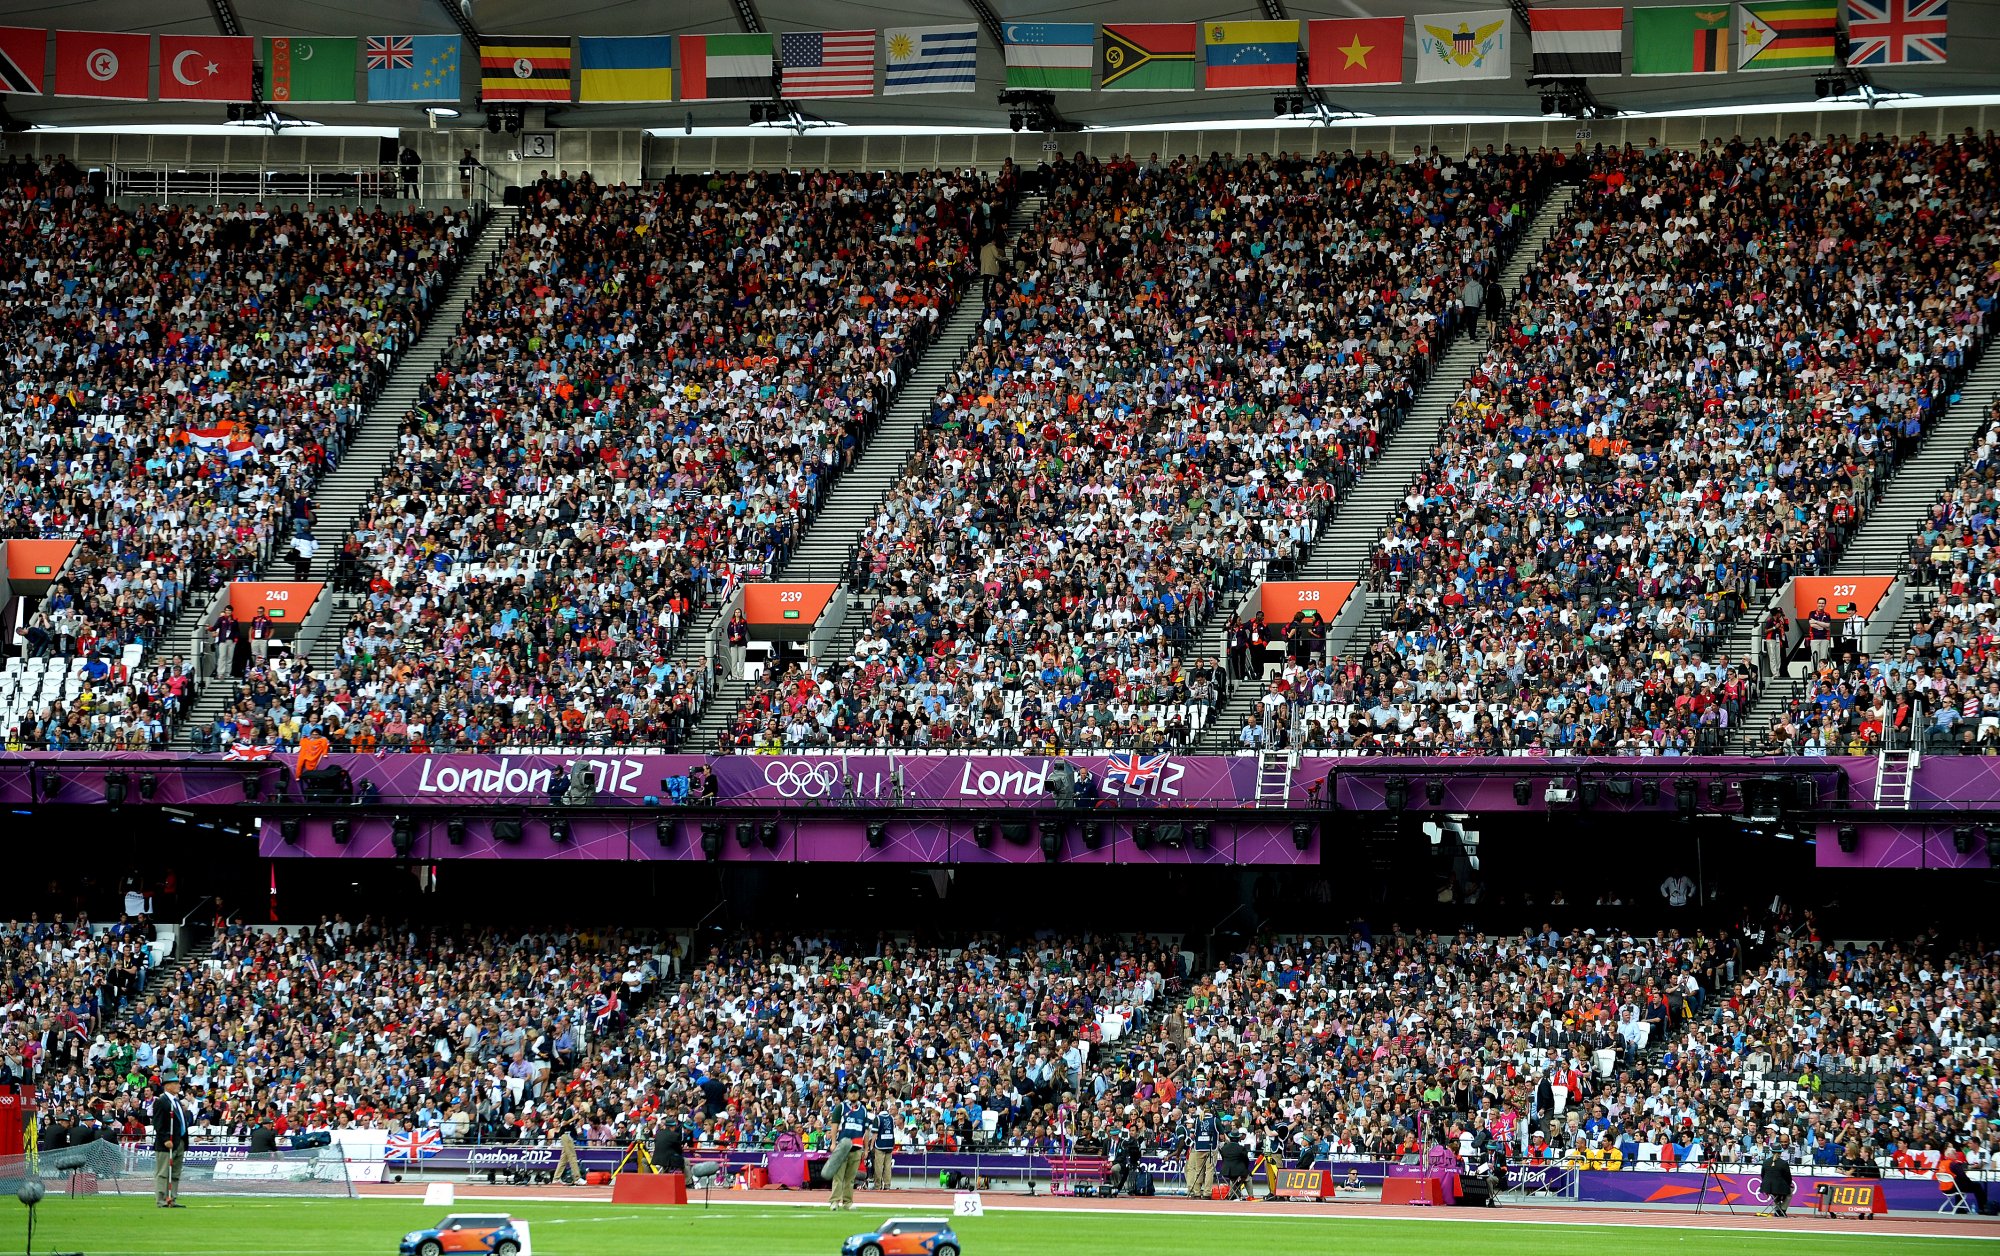 Crowds at London 2012